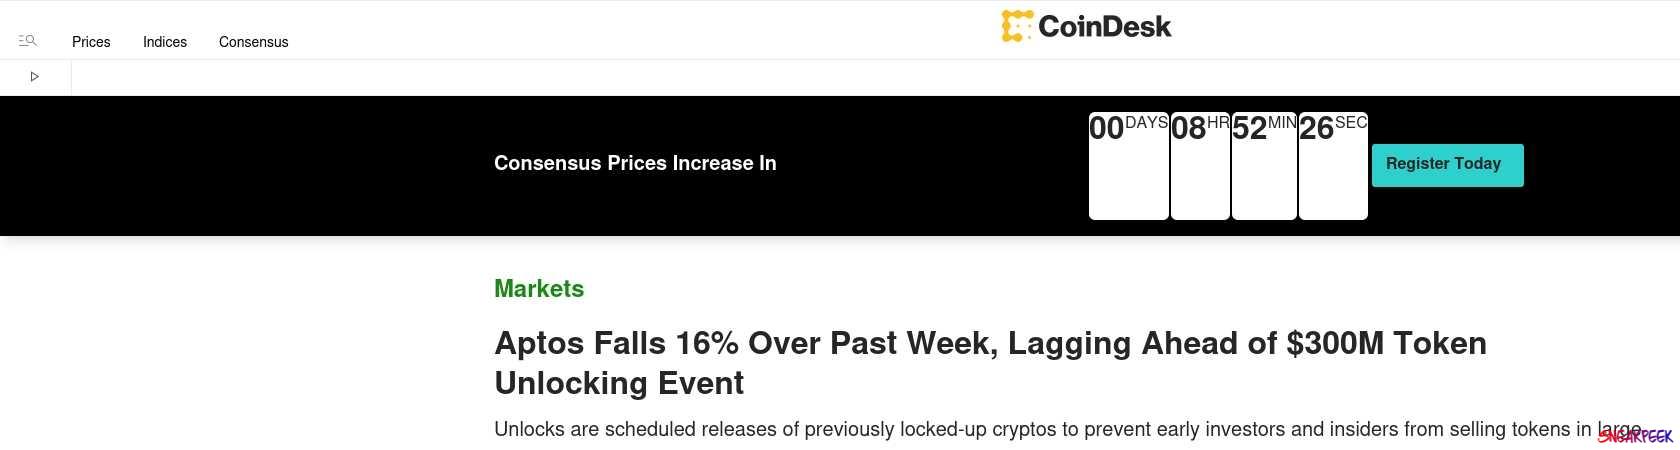 Read the full Article:  ⭲ Aptos Falls 16% Over Past Week, Lagging Ahead of $300M Token Unlocking Event